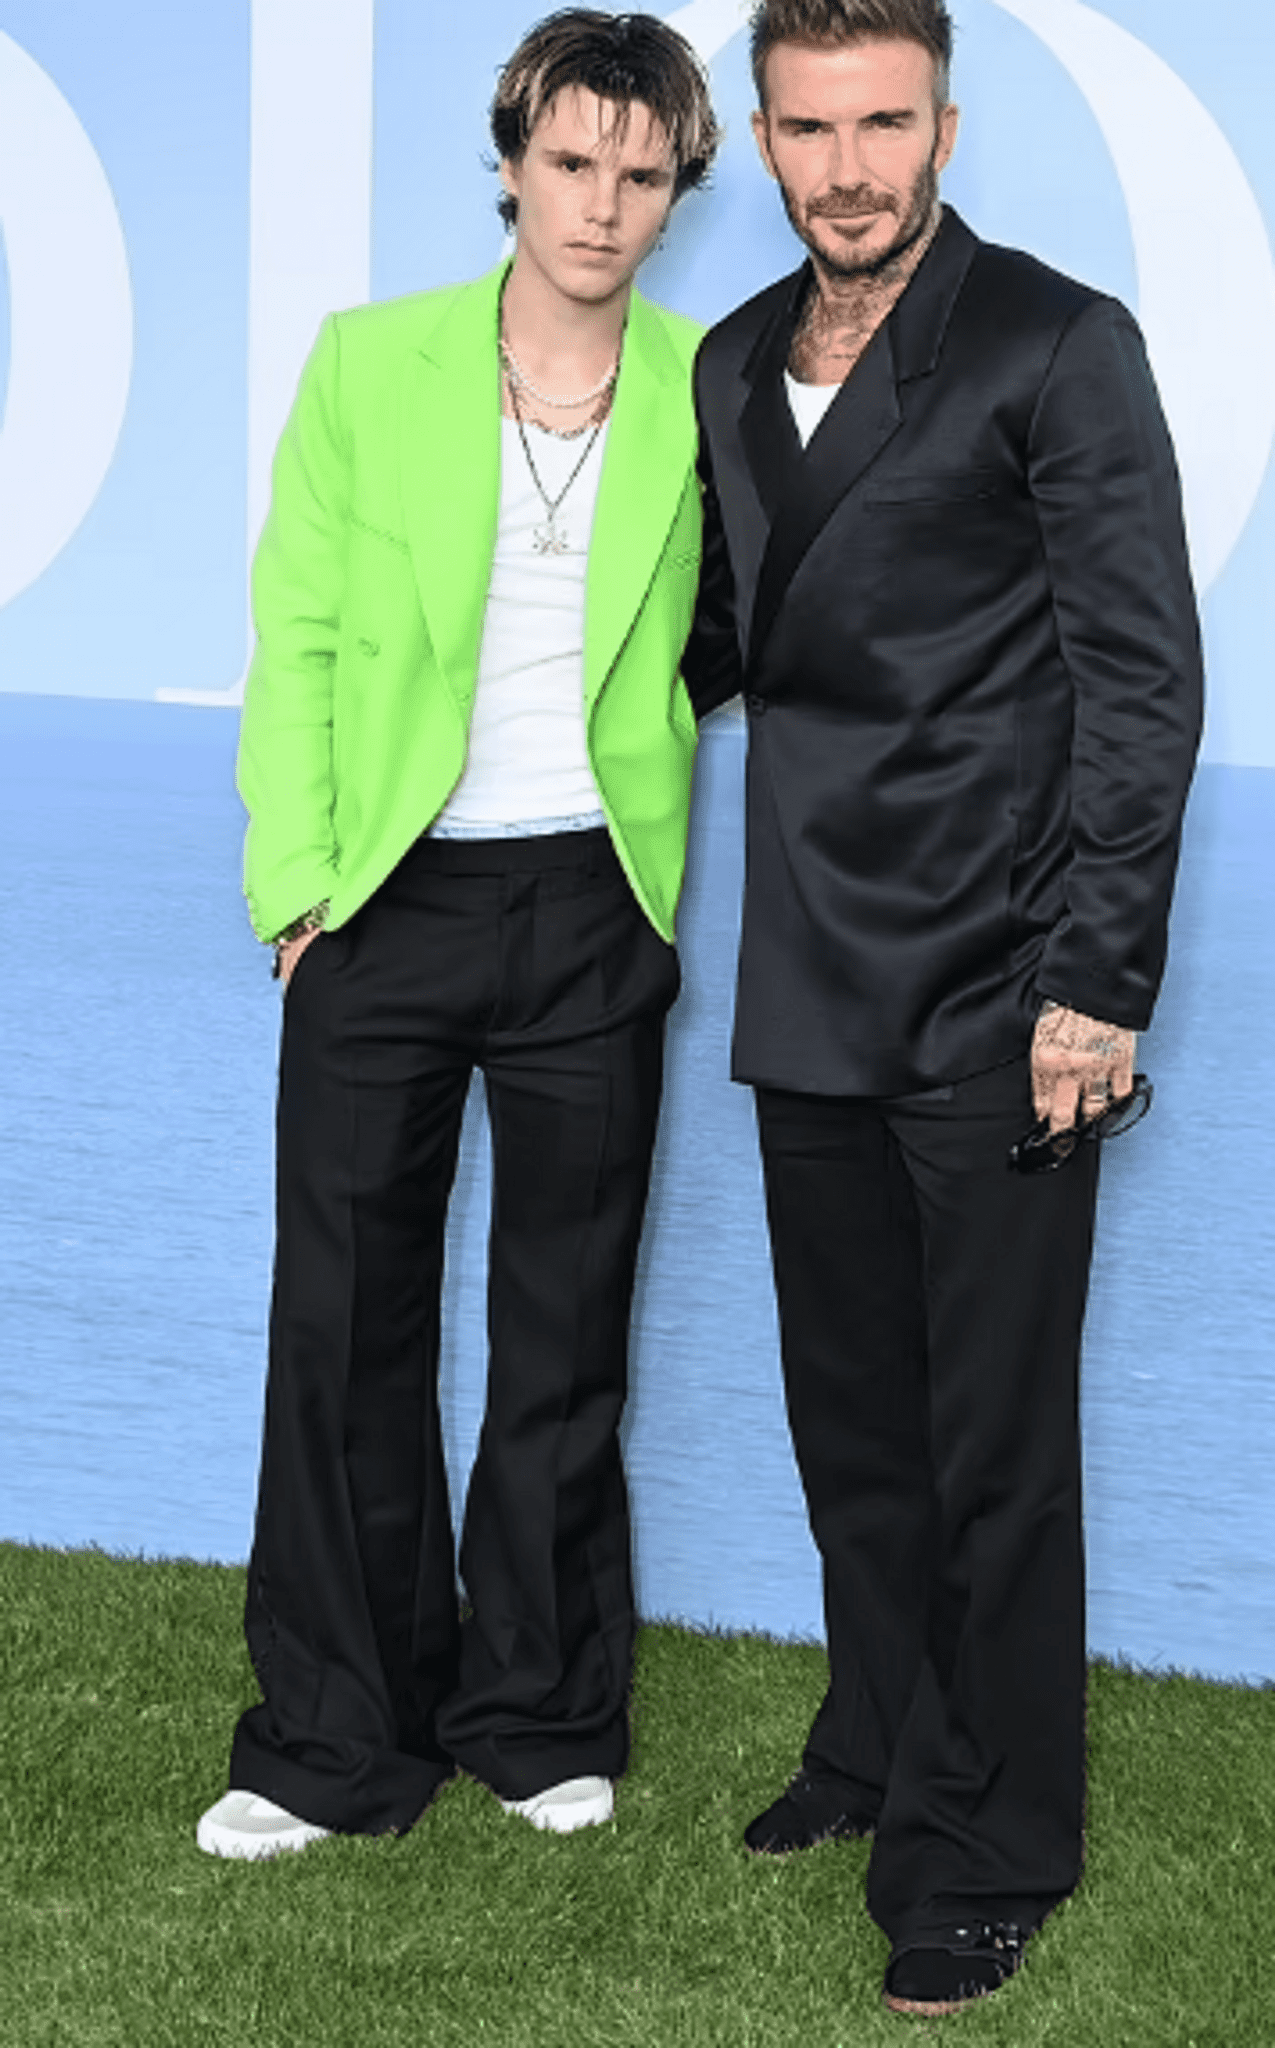 David Beckham attends the Dior fashion show with his youngest son, Cruz